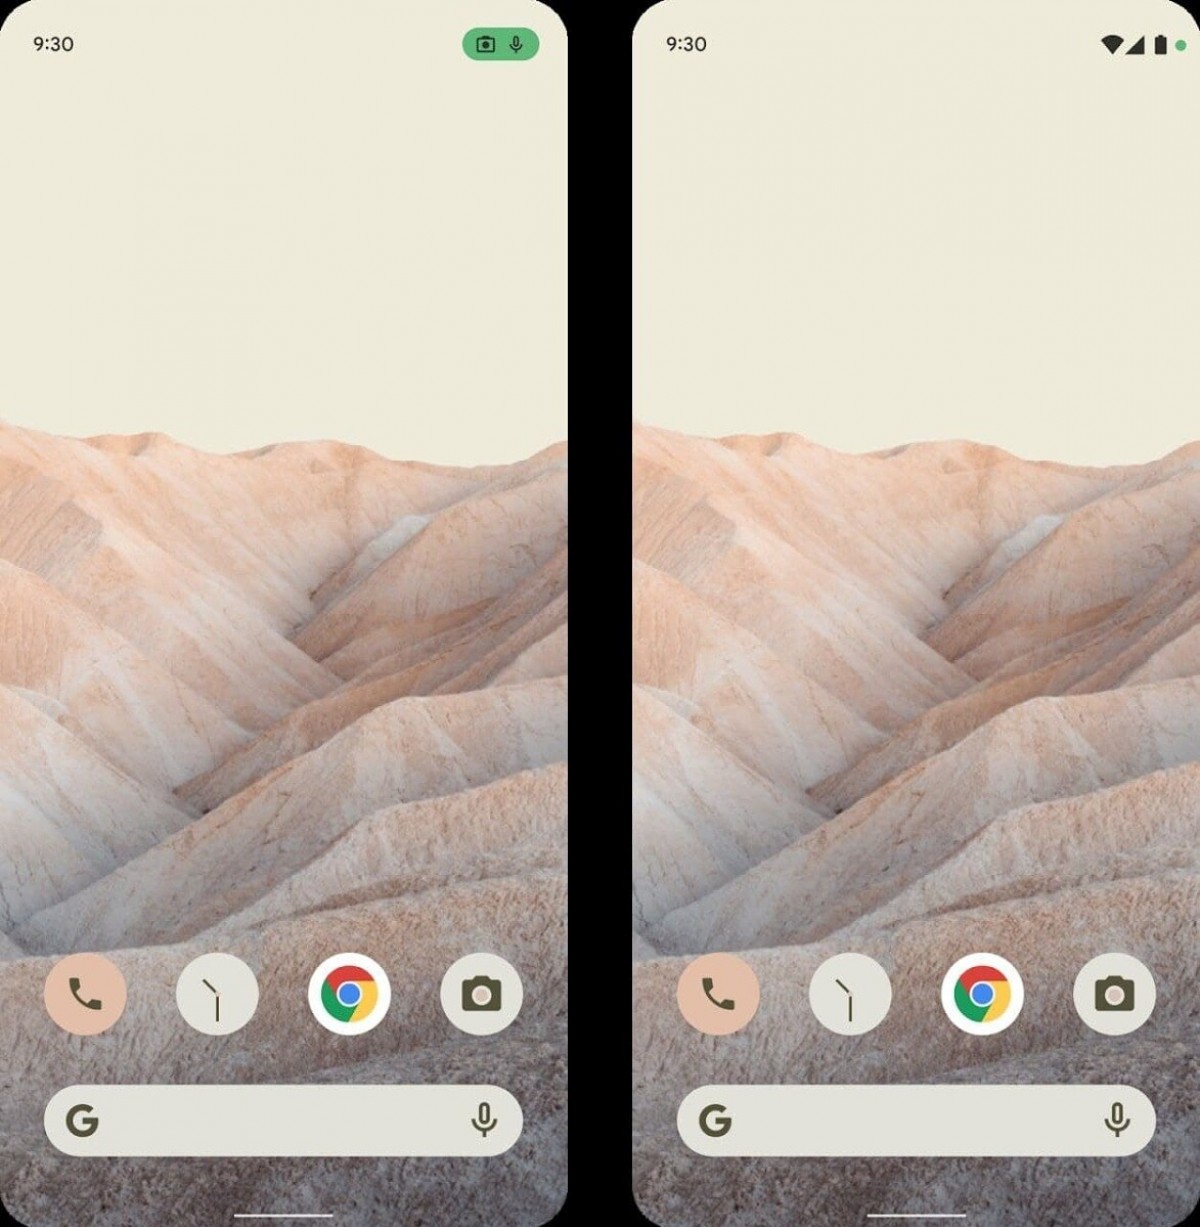 Here’s our first look at the Android 12 redesign